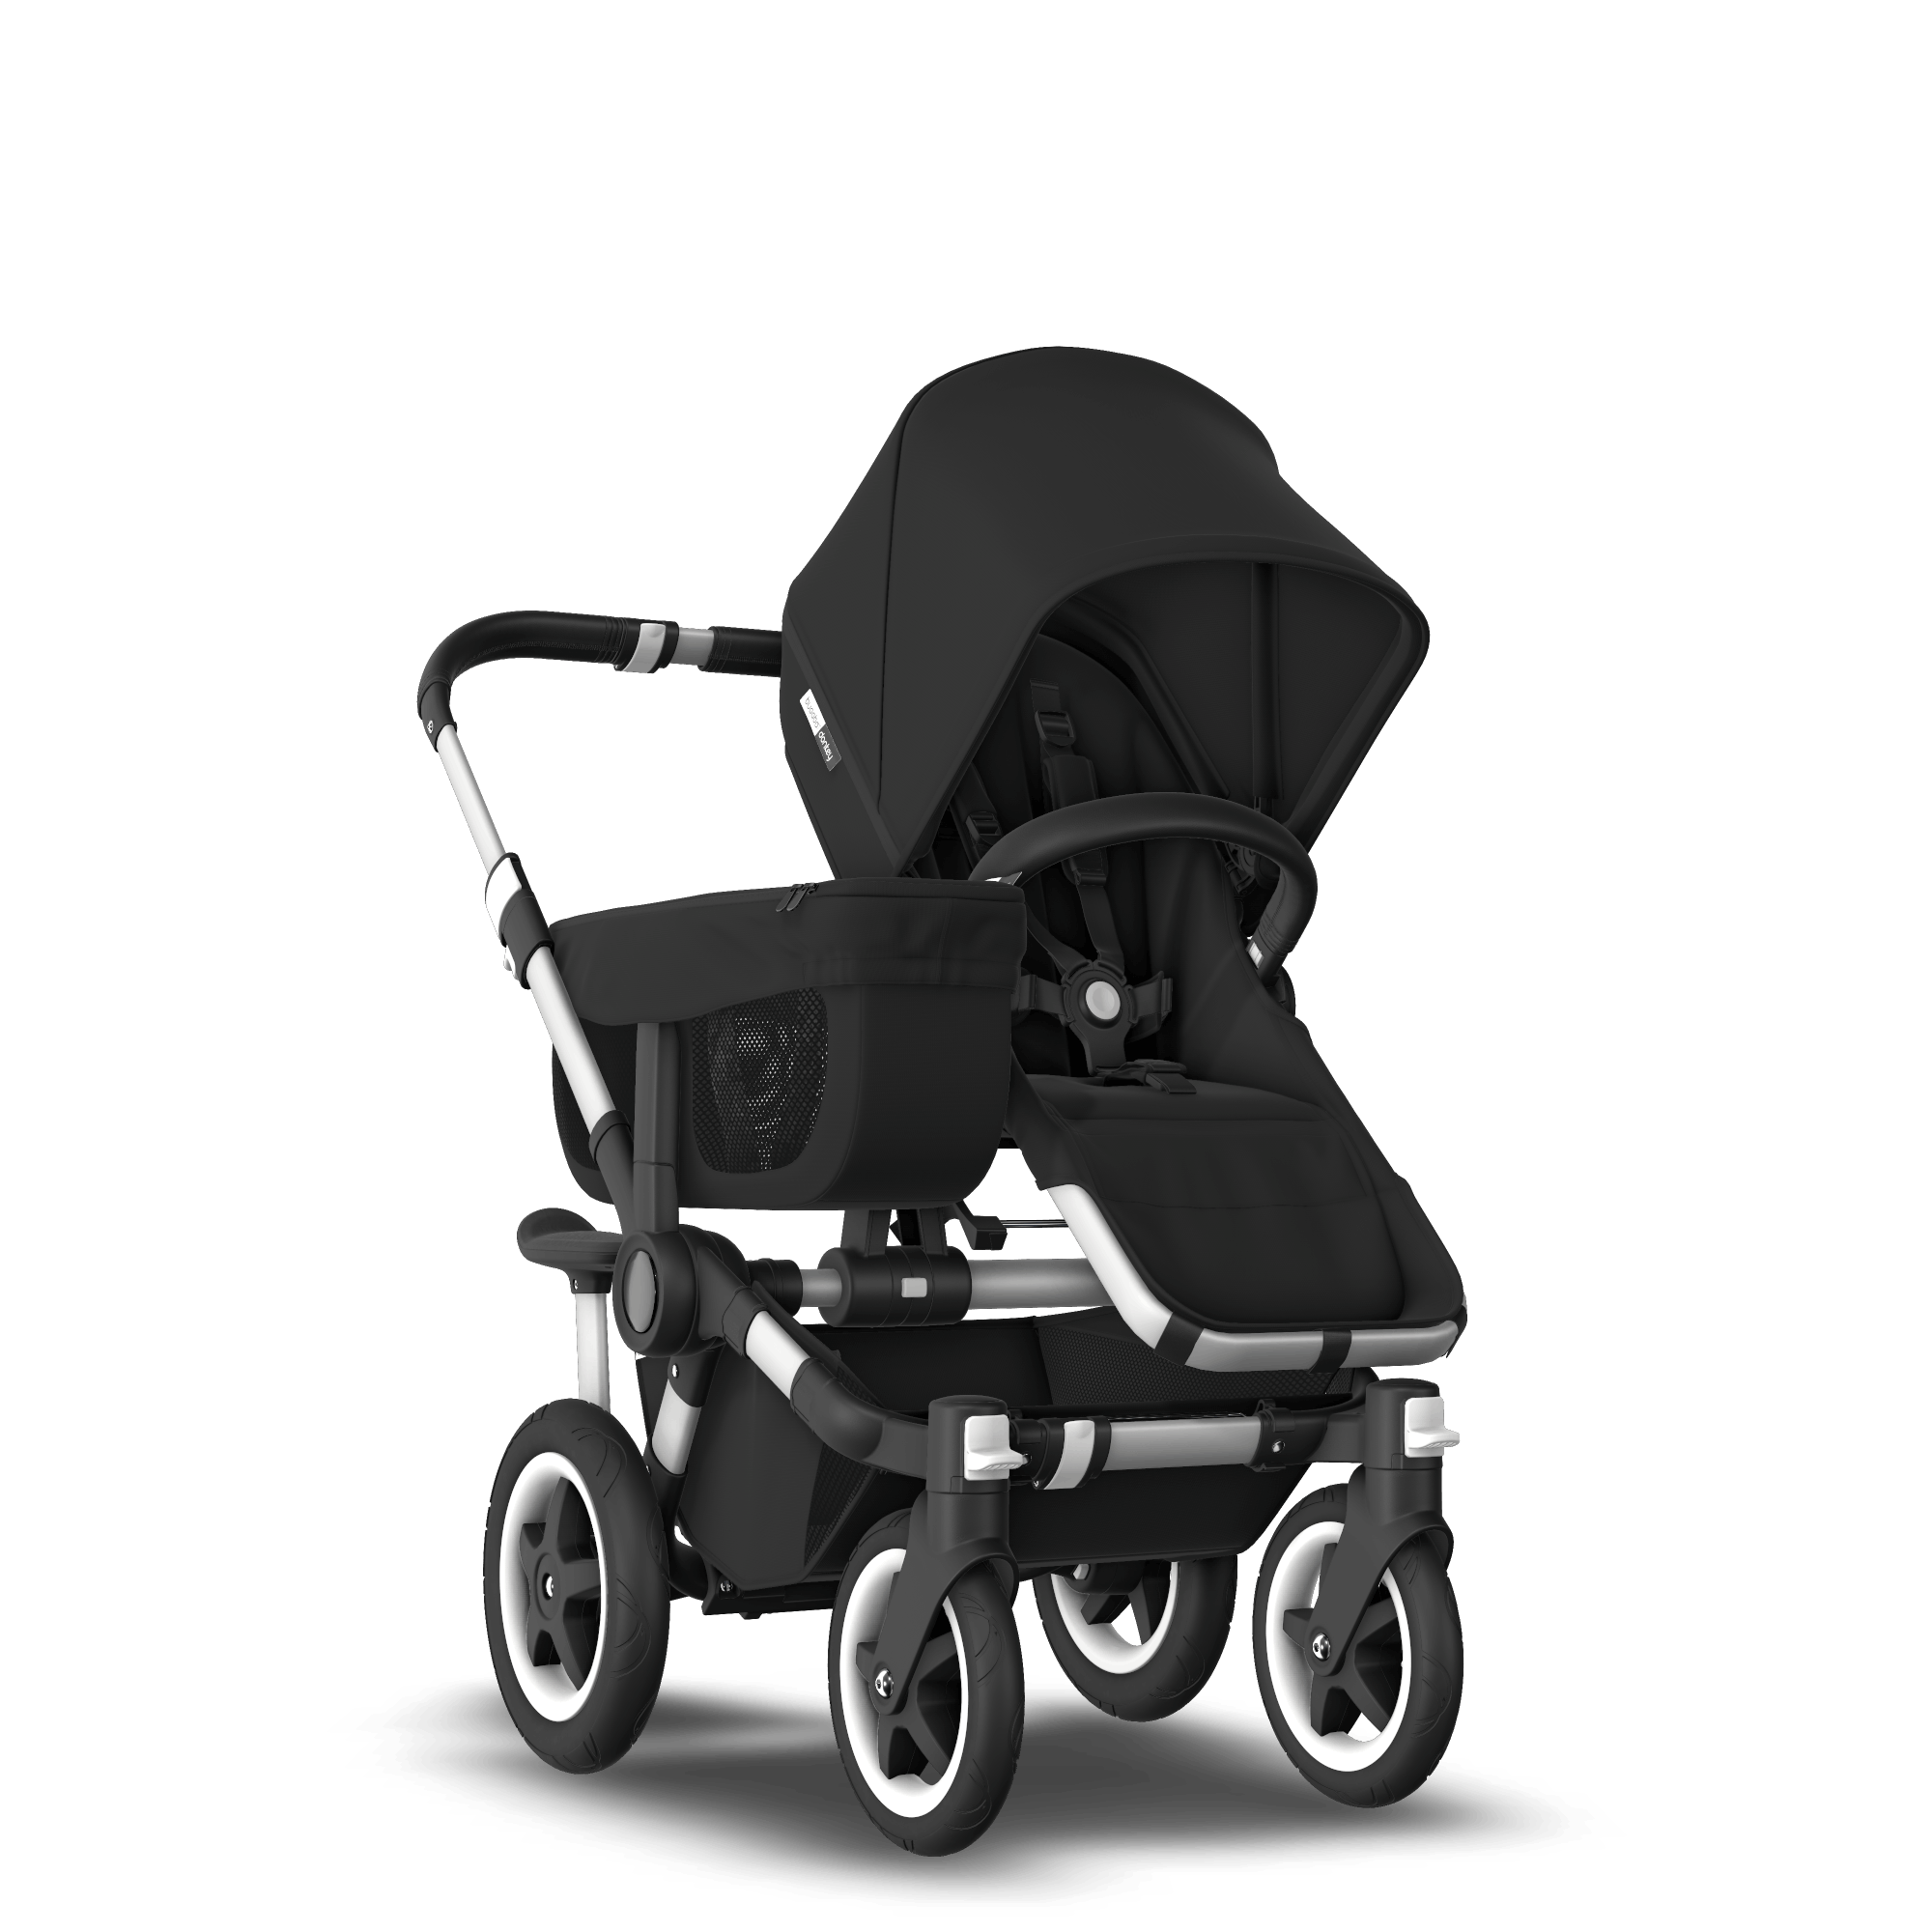 sit and stand stroller uk